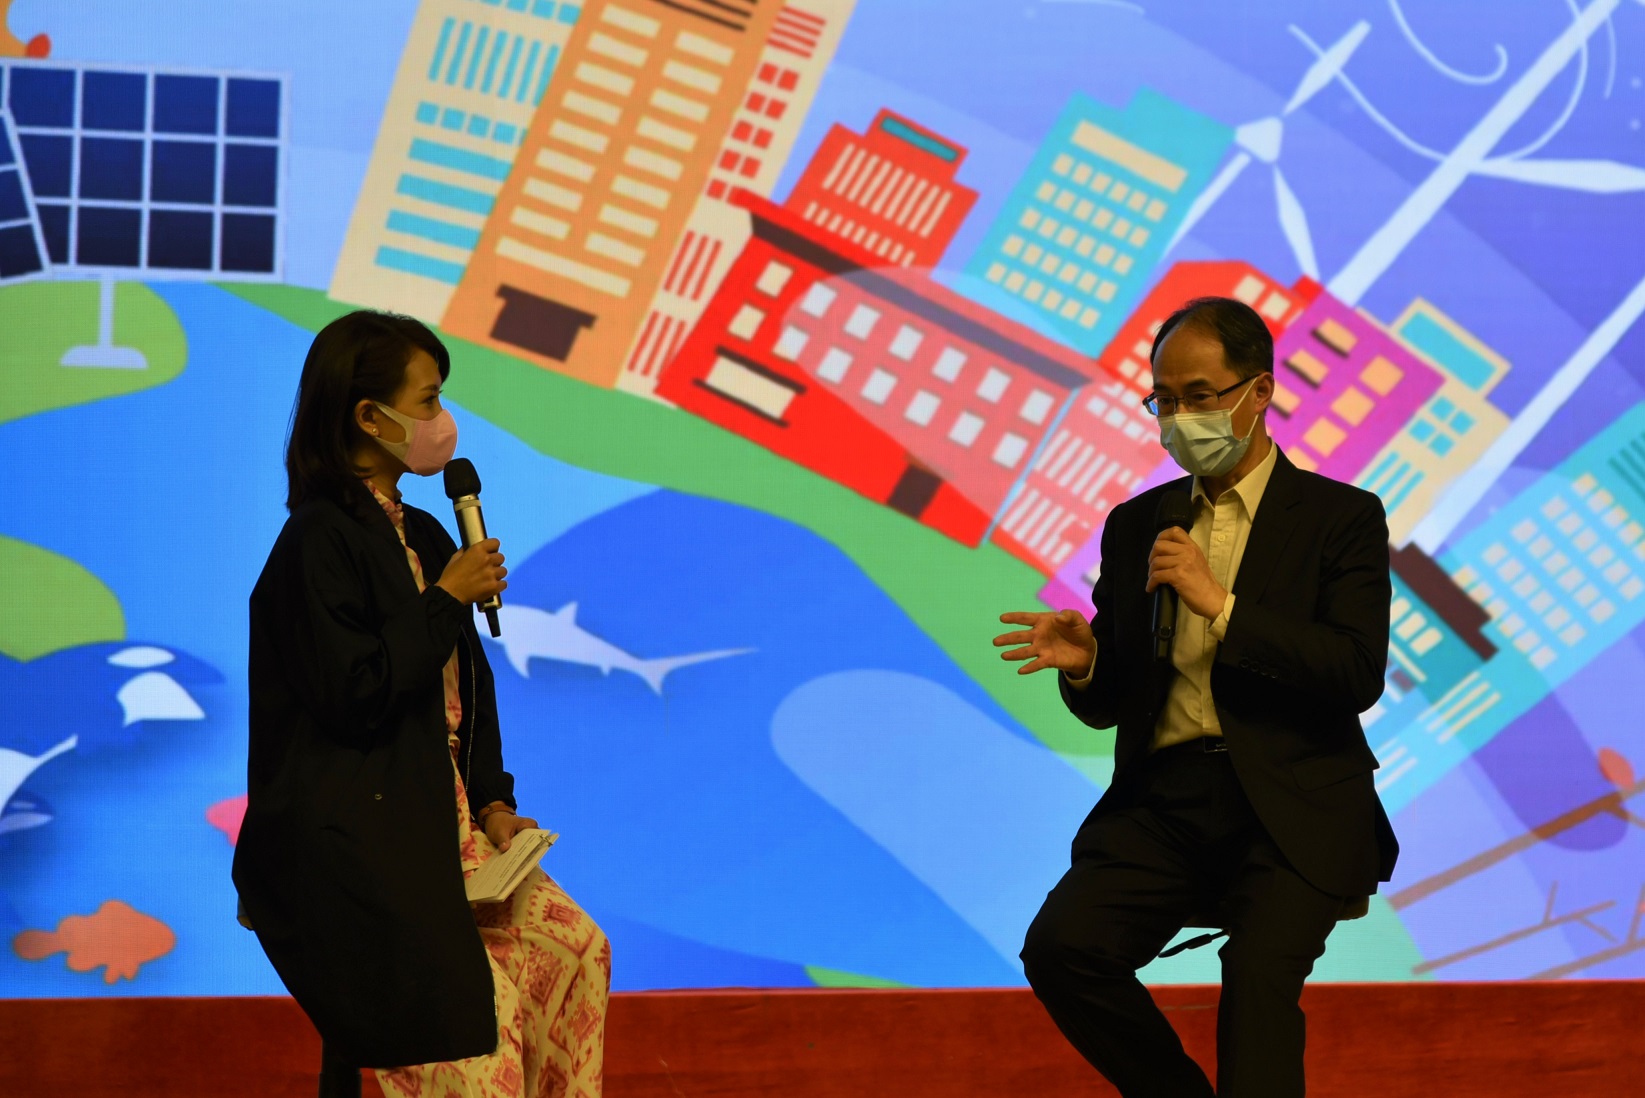 The Director of the Observatory, Dr Cheng Cho-ming (right), explained the relationship between global warming and extreme weather in the live webcast, and called on everyone to save energy and reduce waste, and contribute to environmental protection.